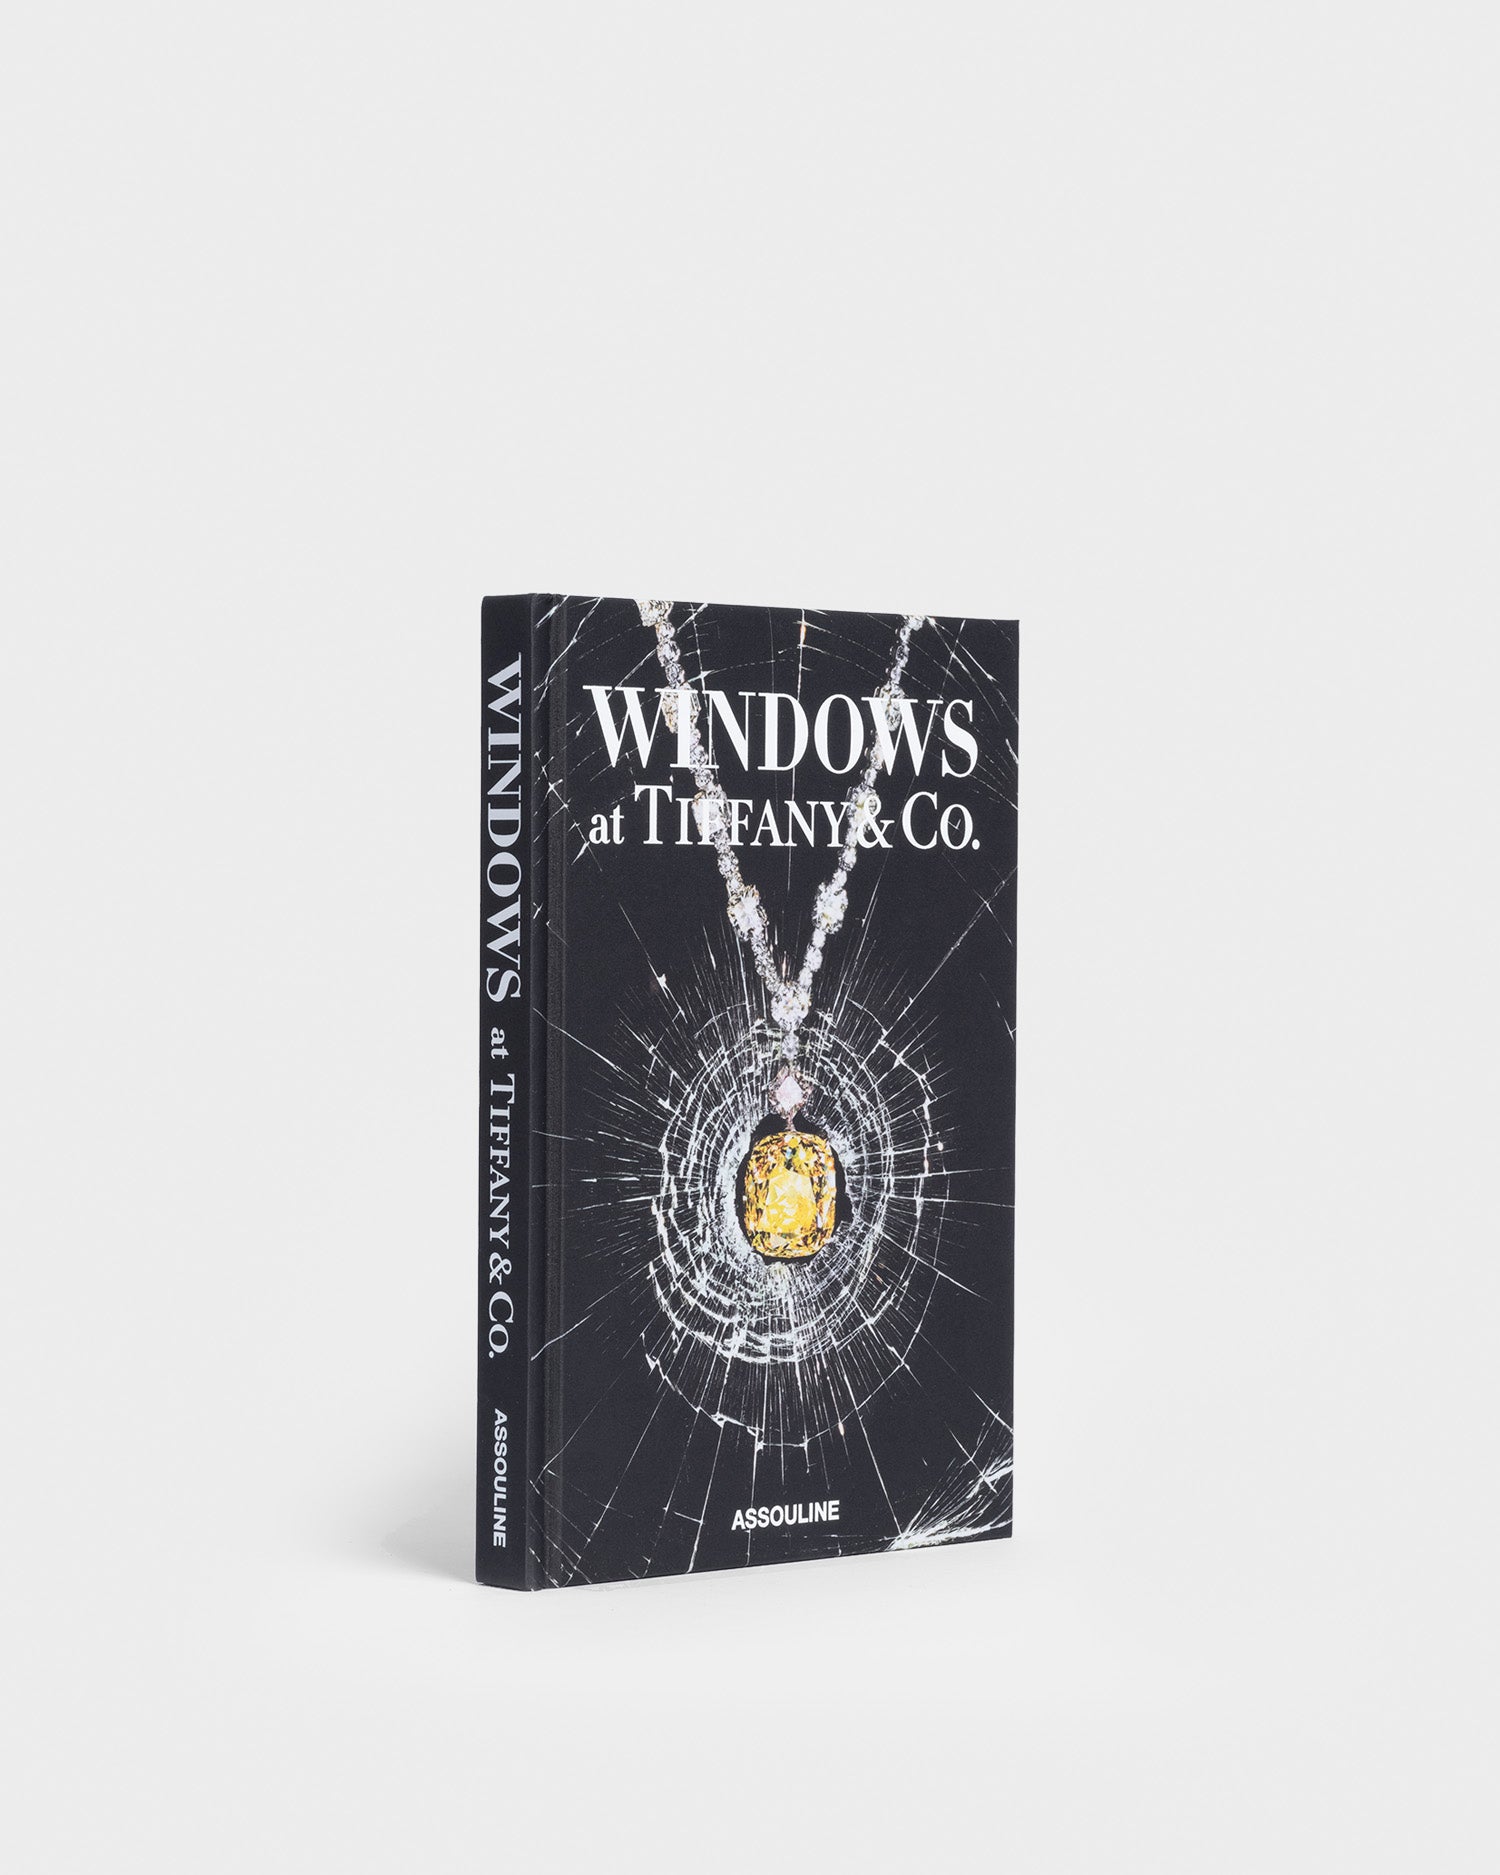 Windows at Tiffany & Co. (Icon Editions) by Christopher Young 